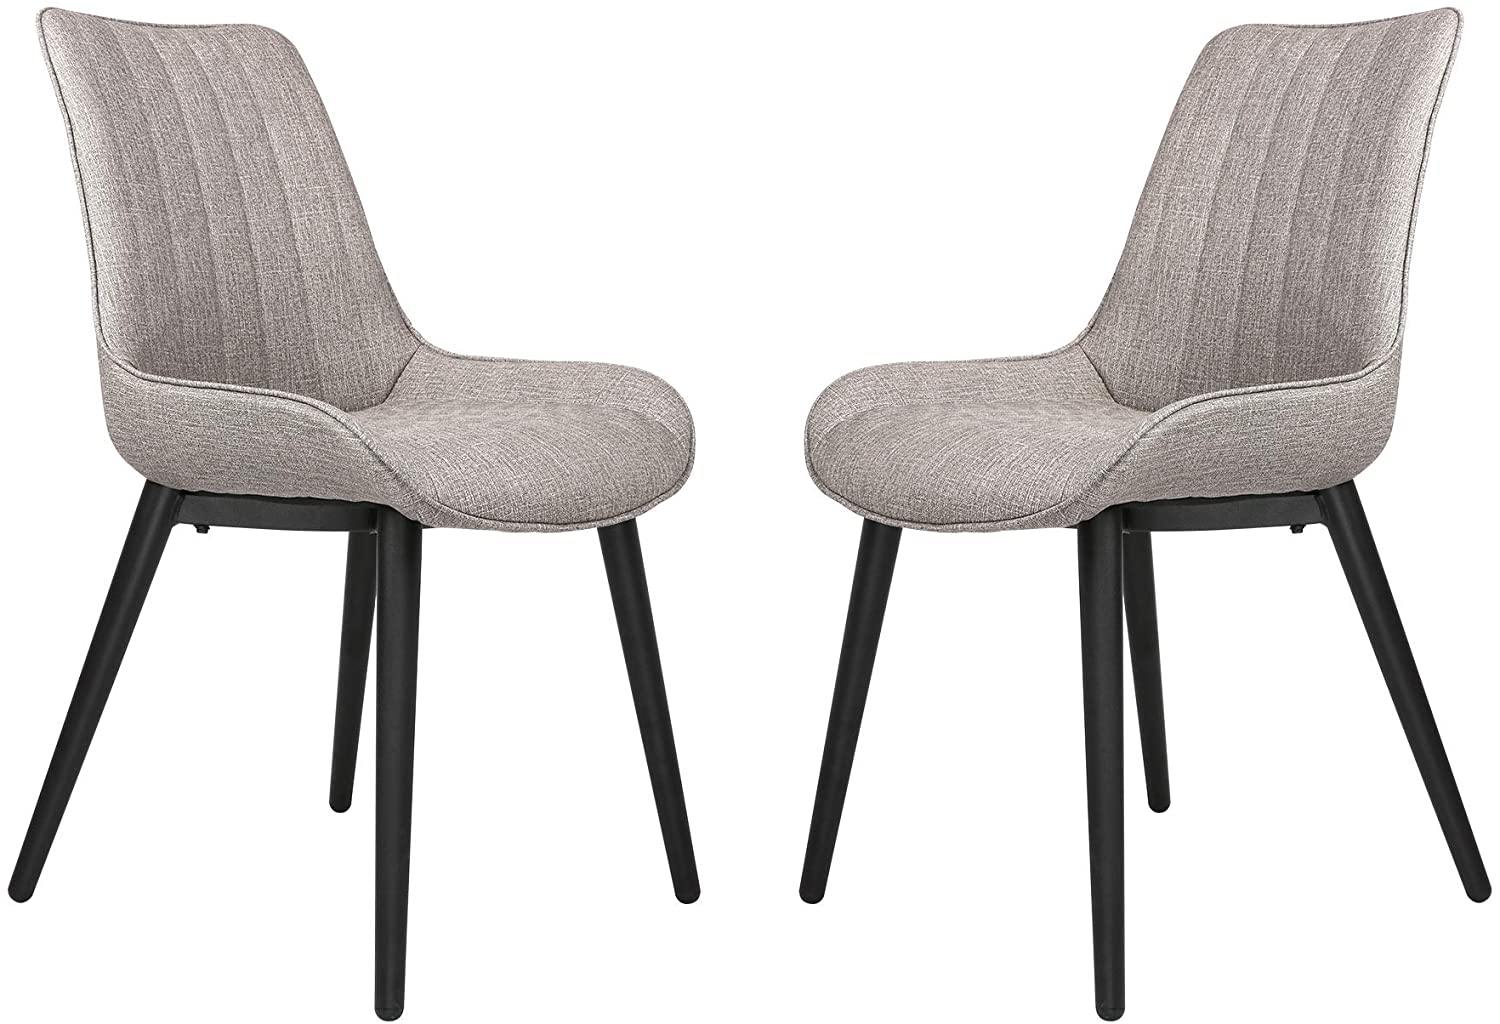 2 Set Modern Accent Chairs with Soft Foam Cushion, Comfortable and Easy to Clean, Curved Ergonomic Design, Dining Room Chair - Bosonshop